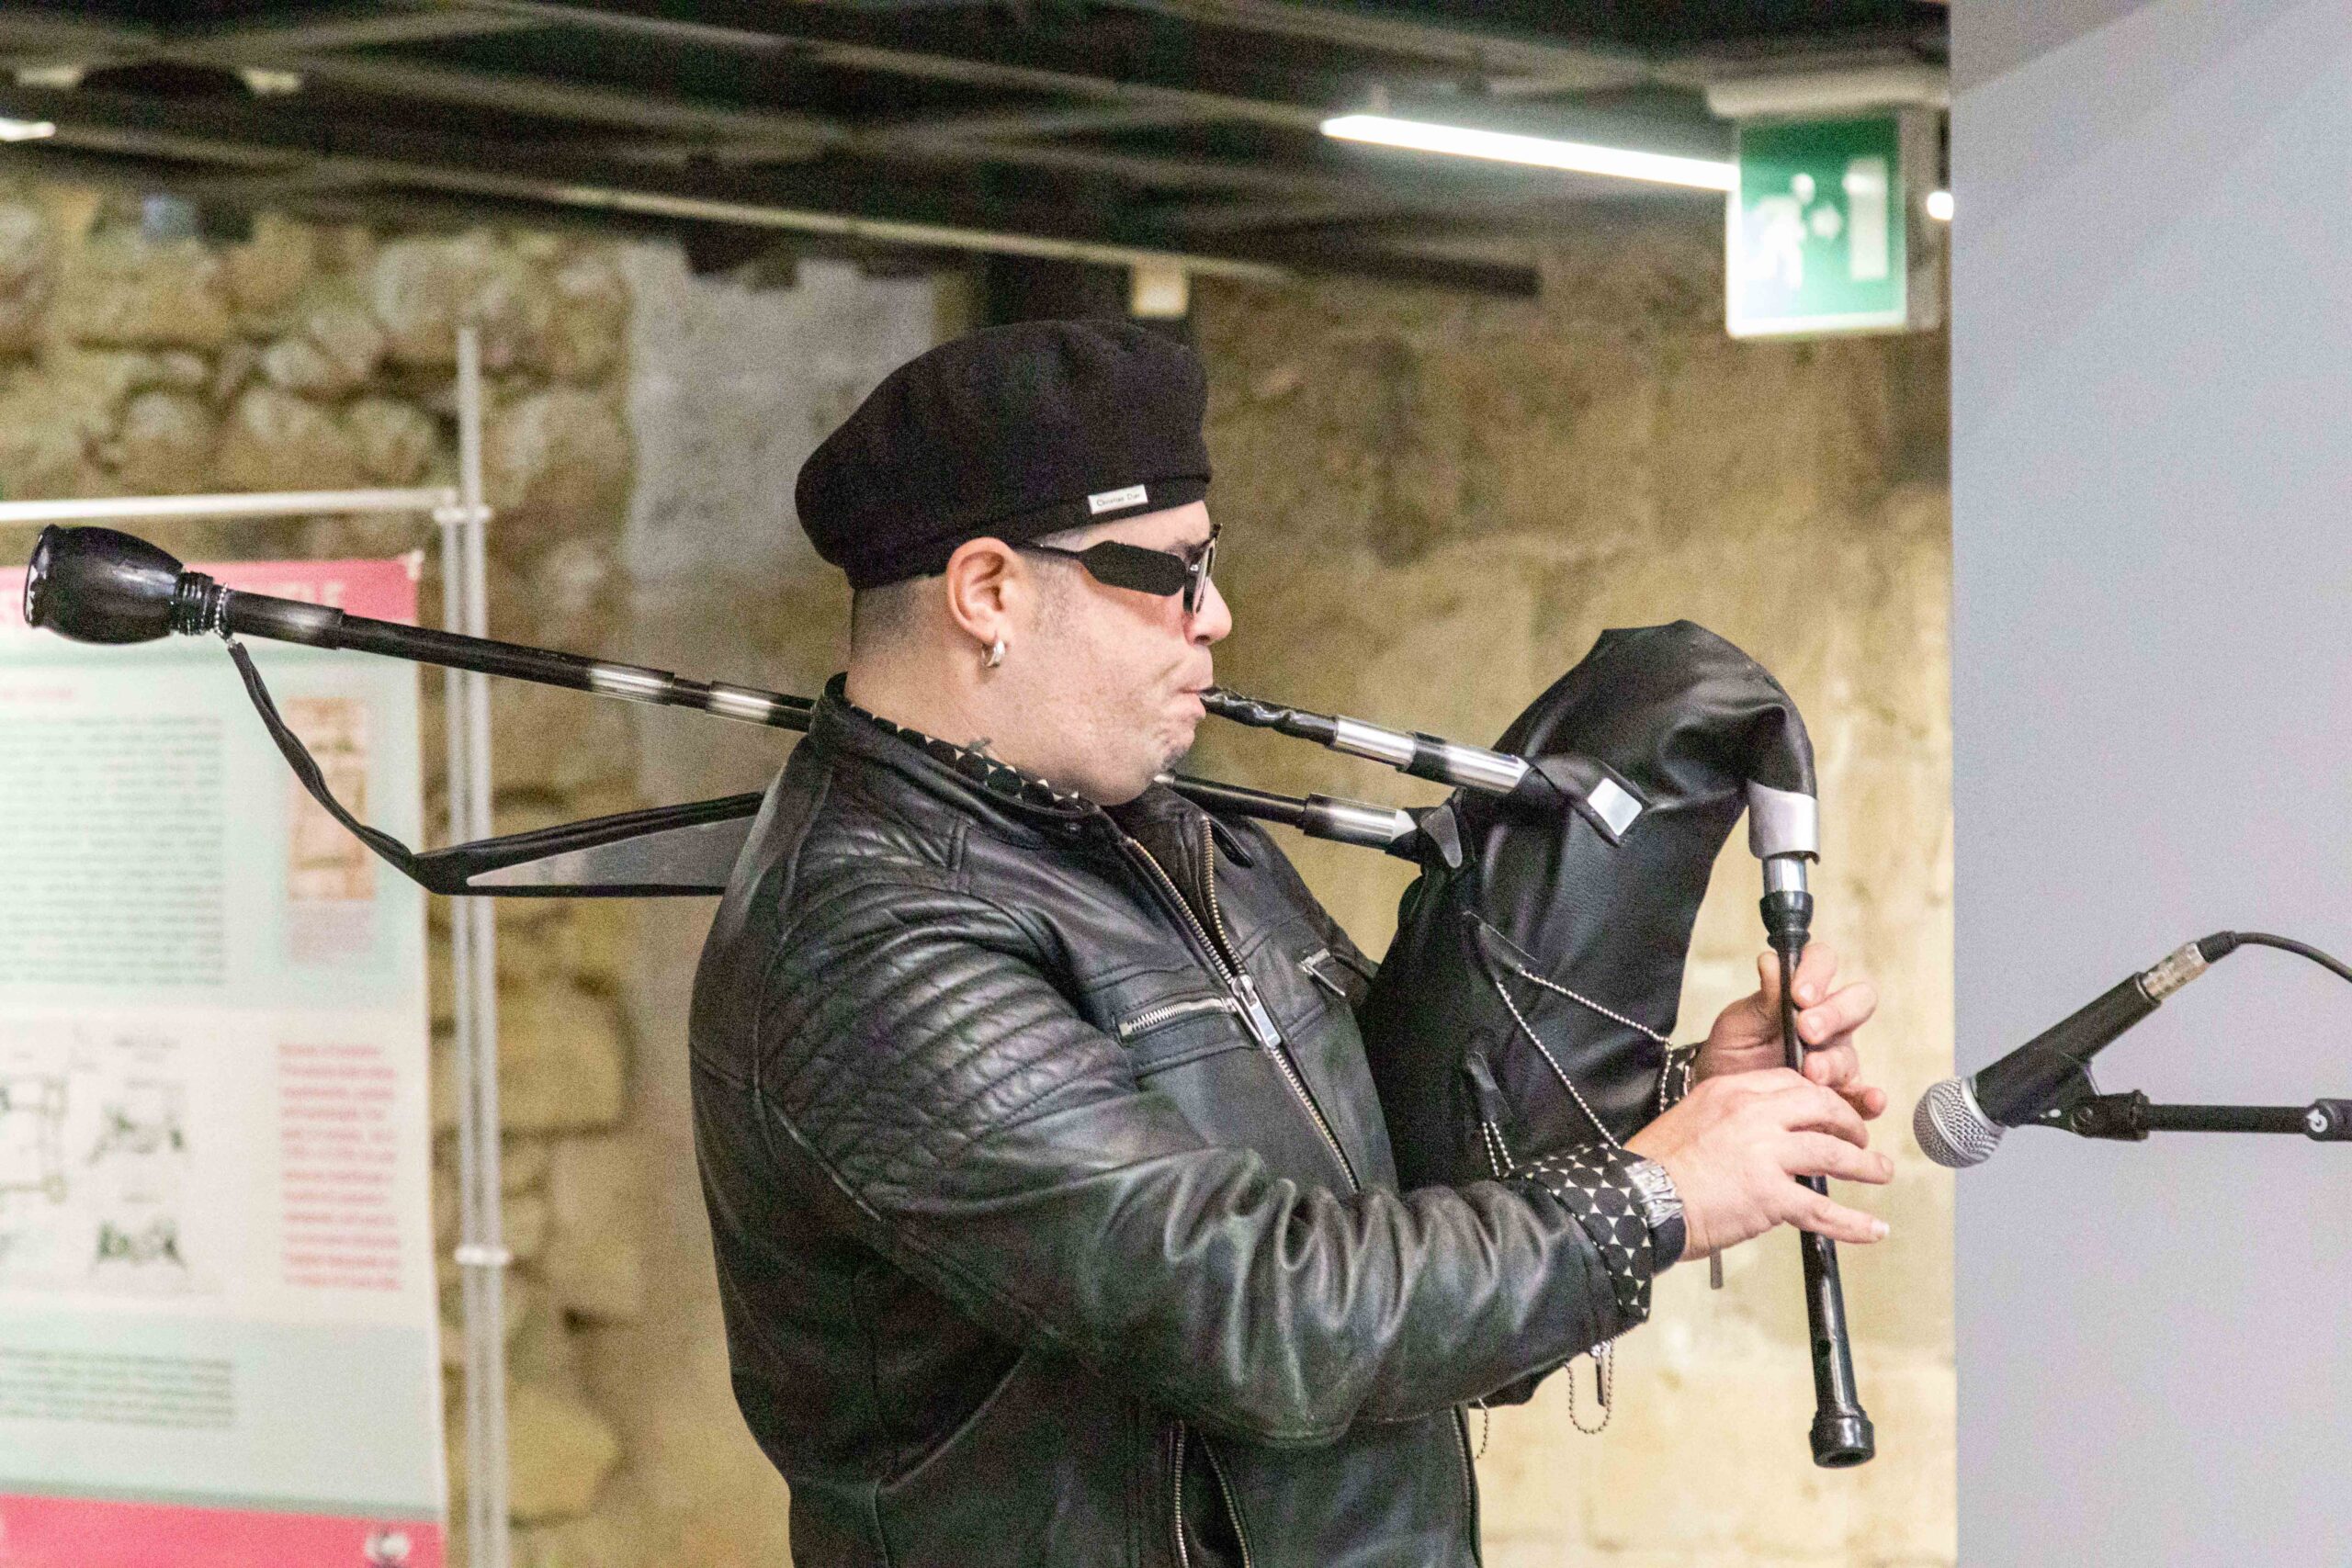 Nicola Agus playing bagpipes realized from recycled materials - Photo: Massimiliano Frau